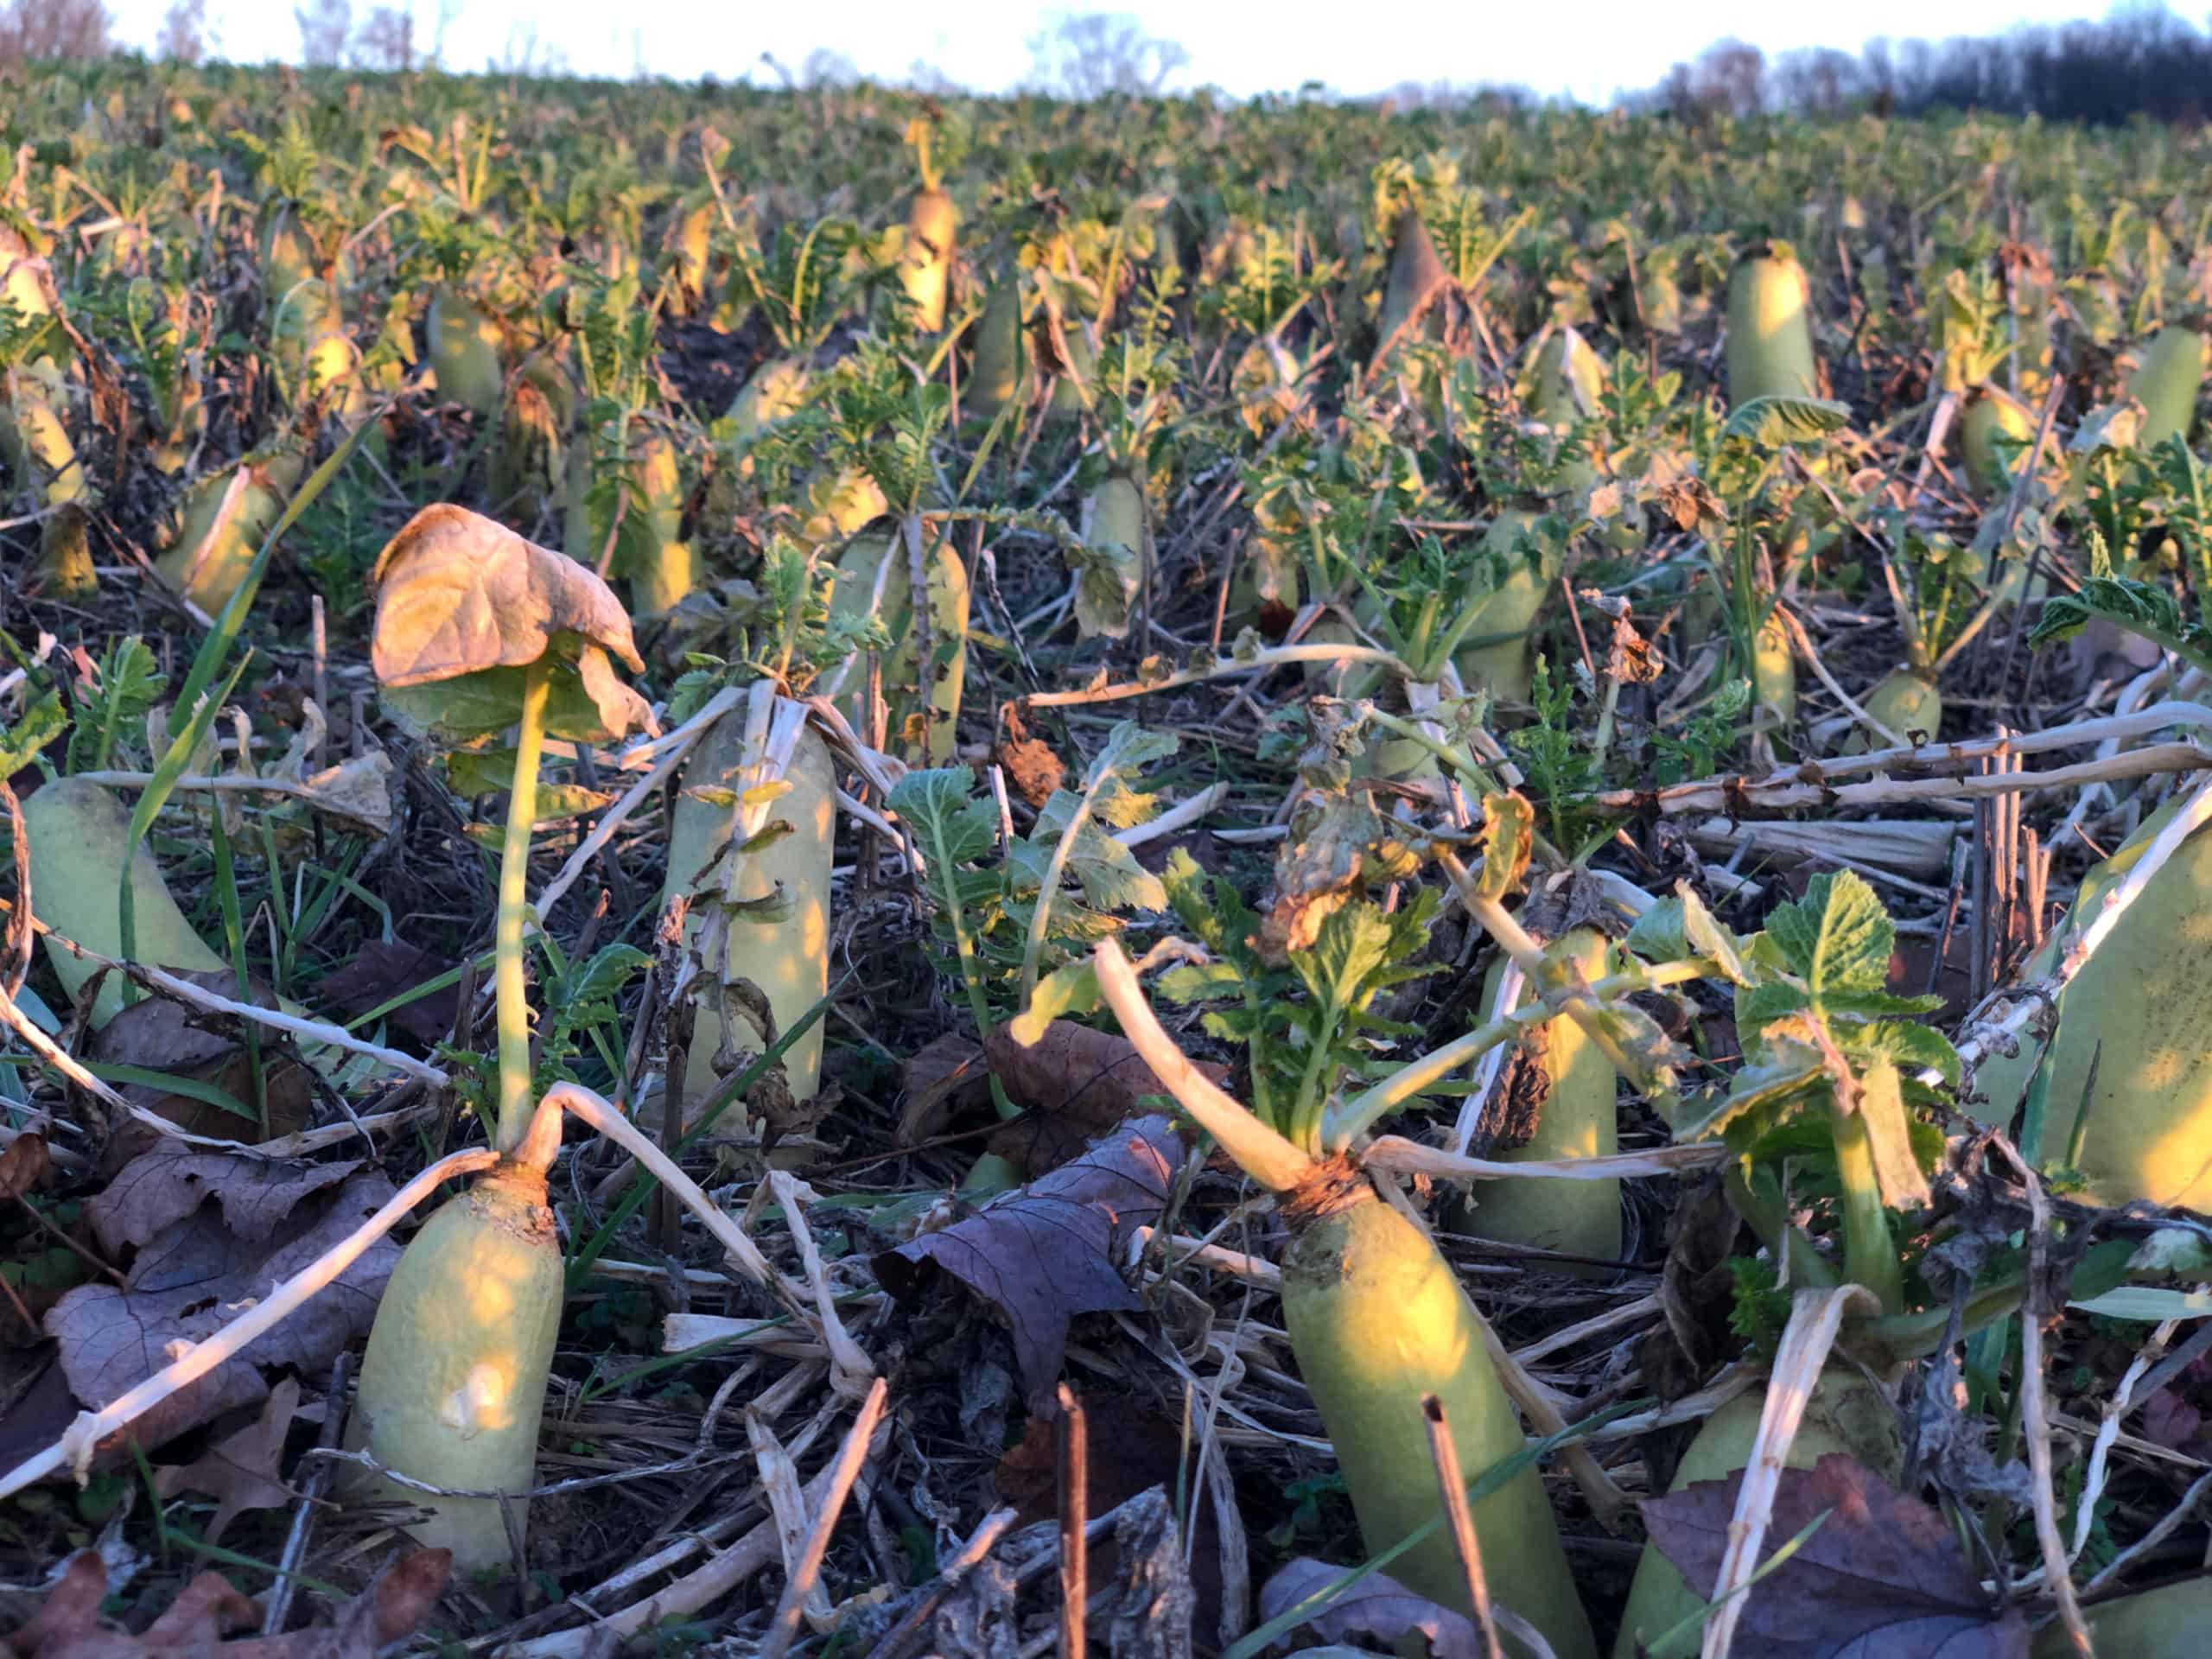 A field of Daikon radish used as a cover crop in farm fields at Crow's Nest Preserve